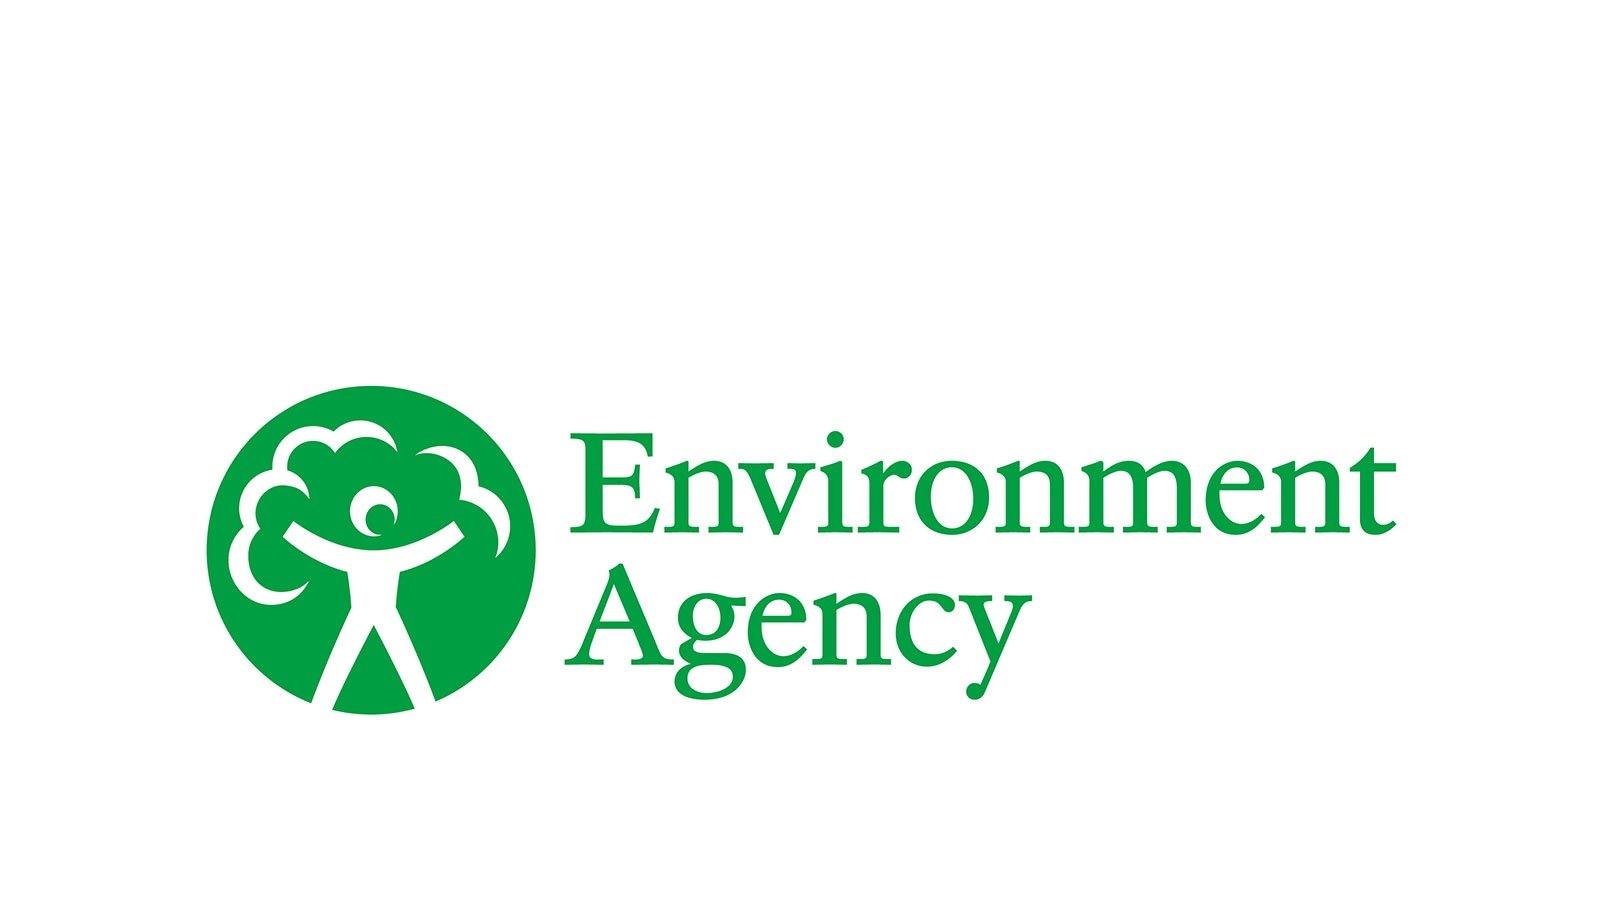 Environment Agency signs up with Asite.